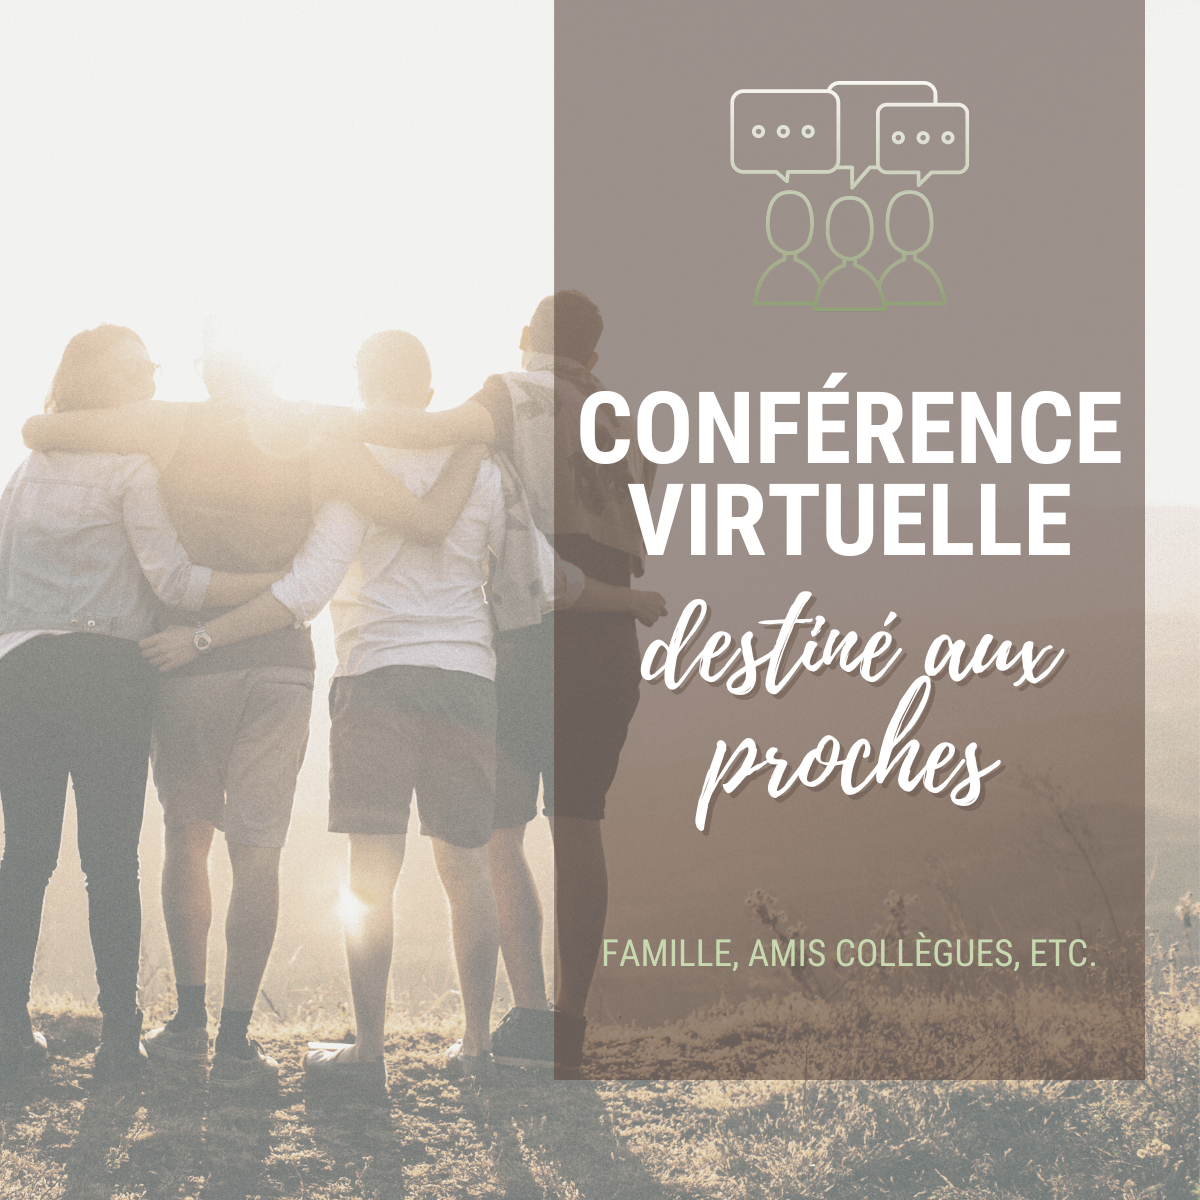 Conference virtuelle_proches